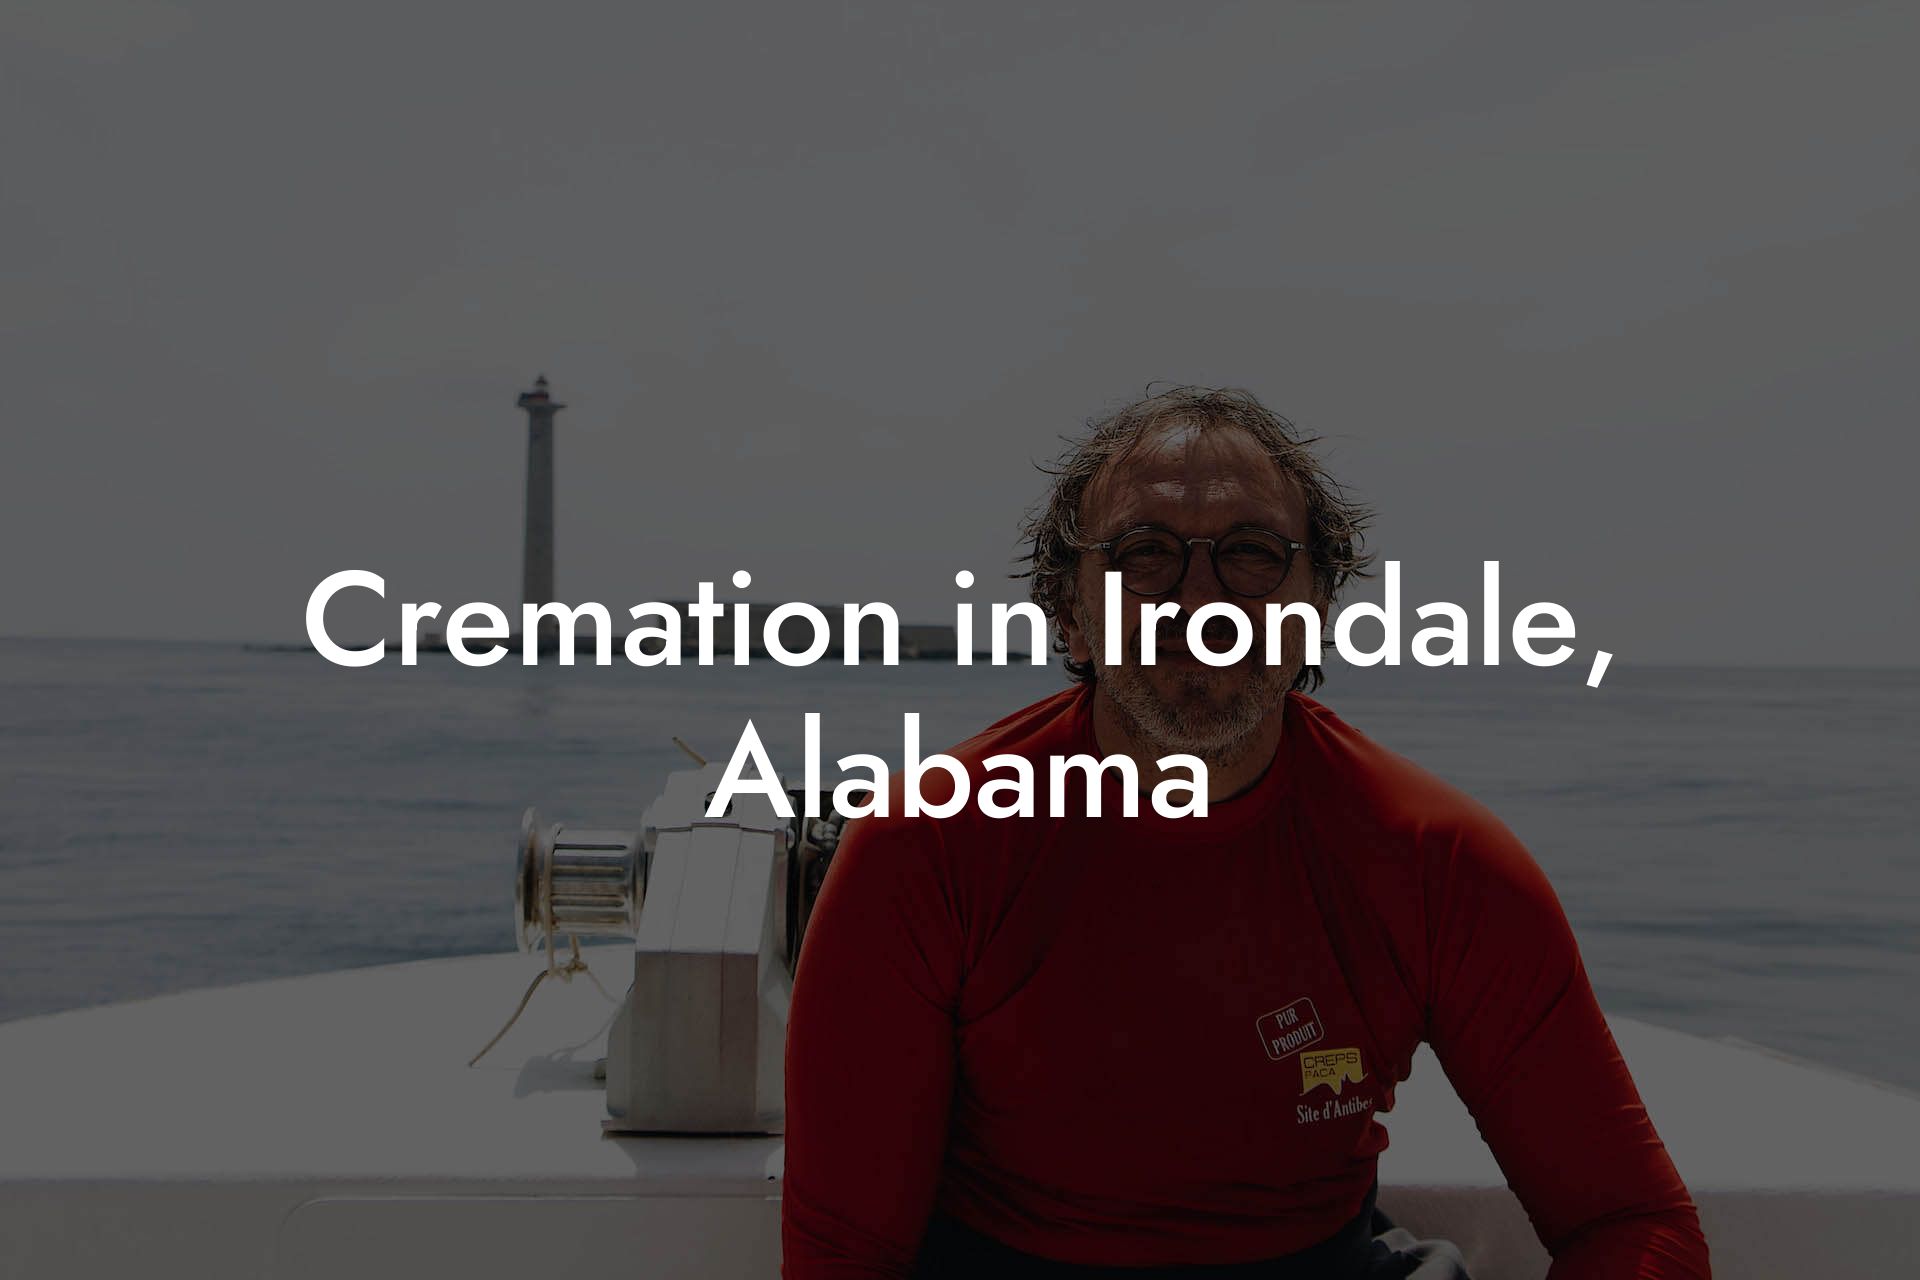 Cremation in Irondale, Alabama